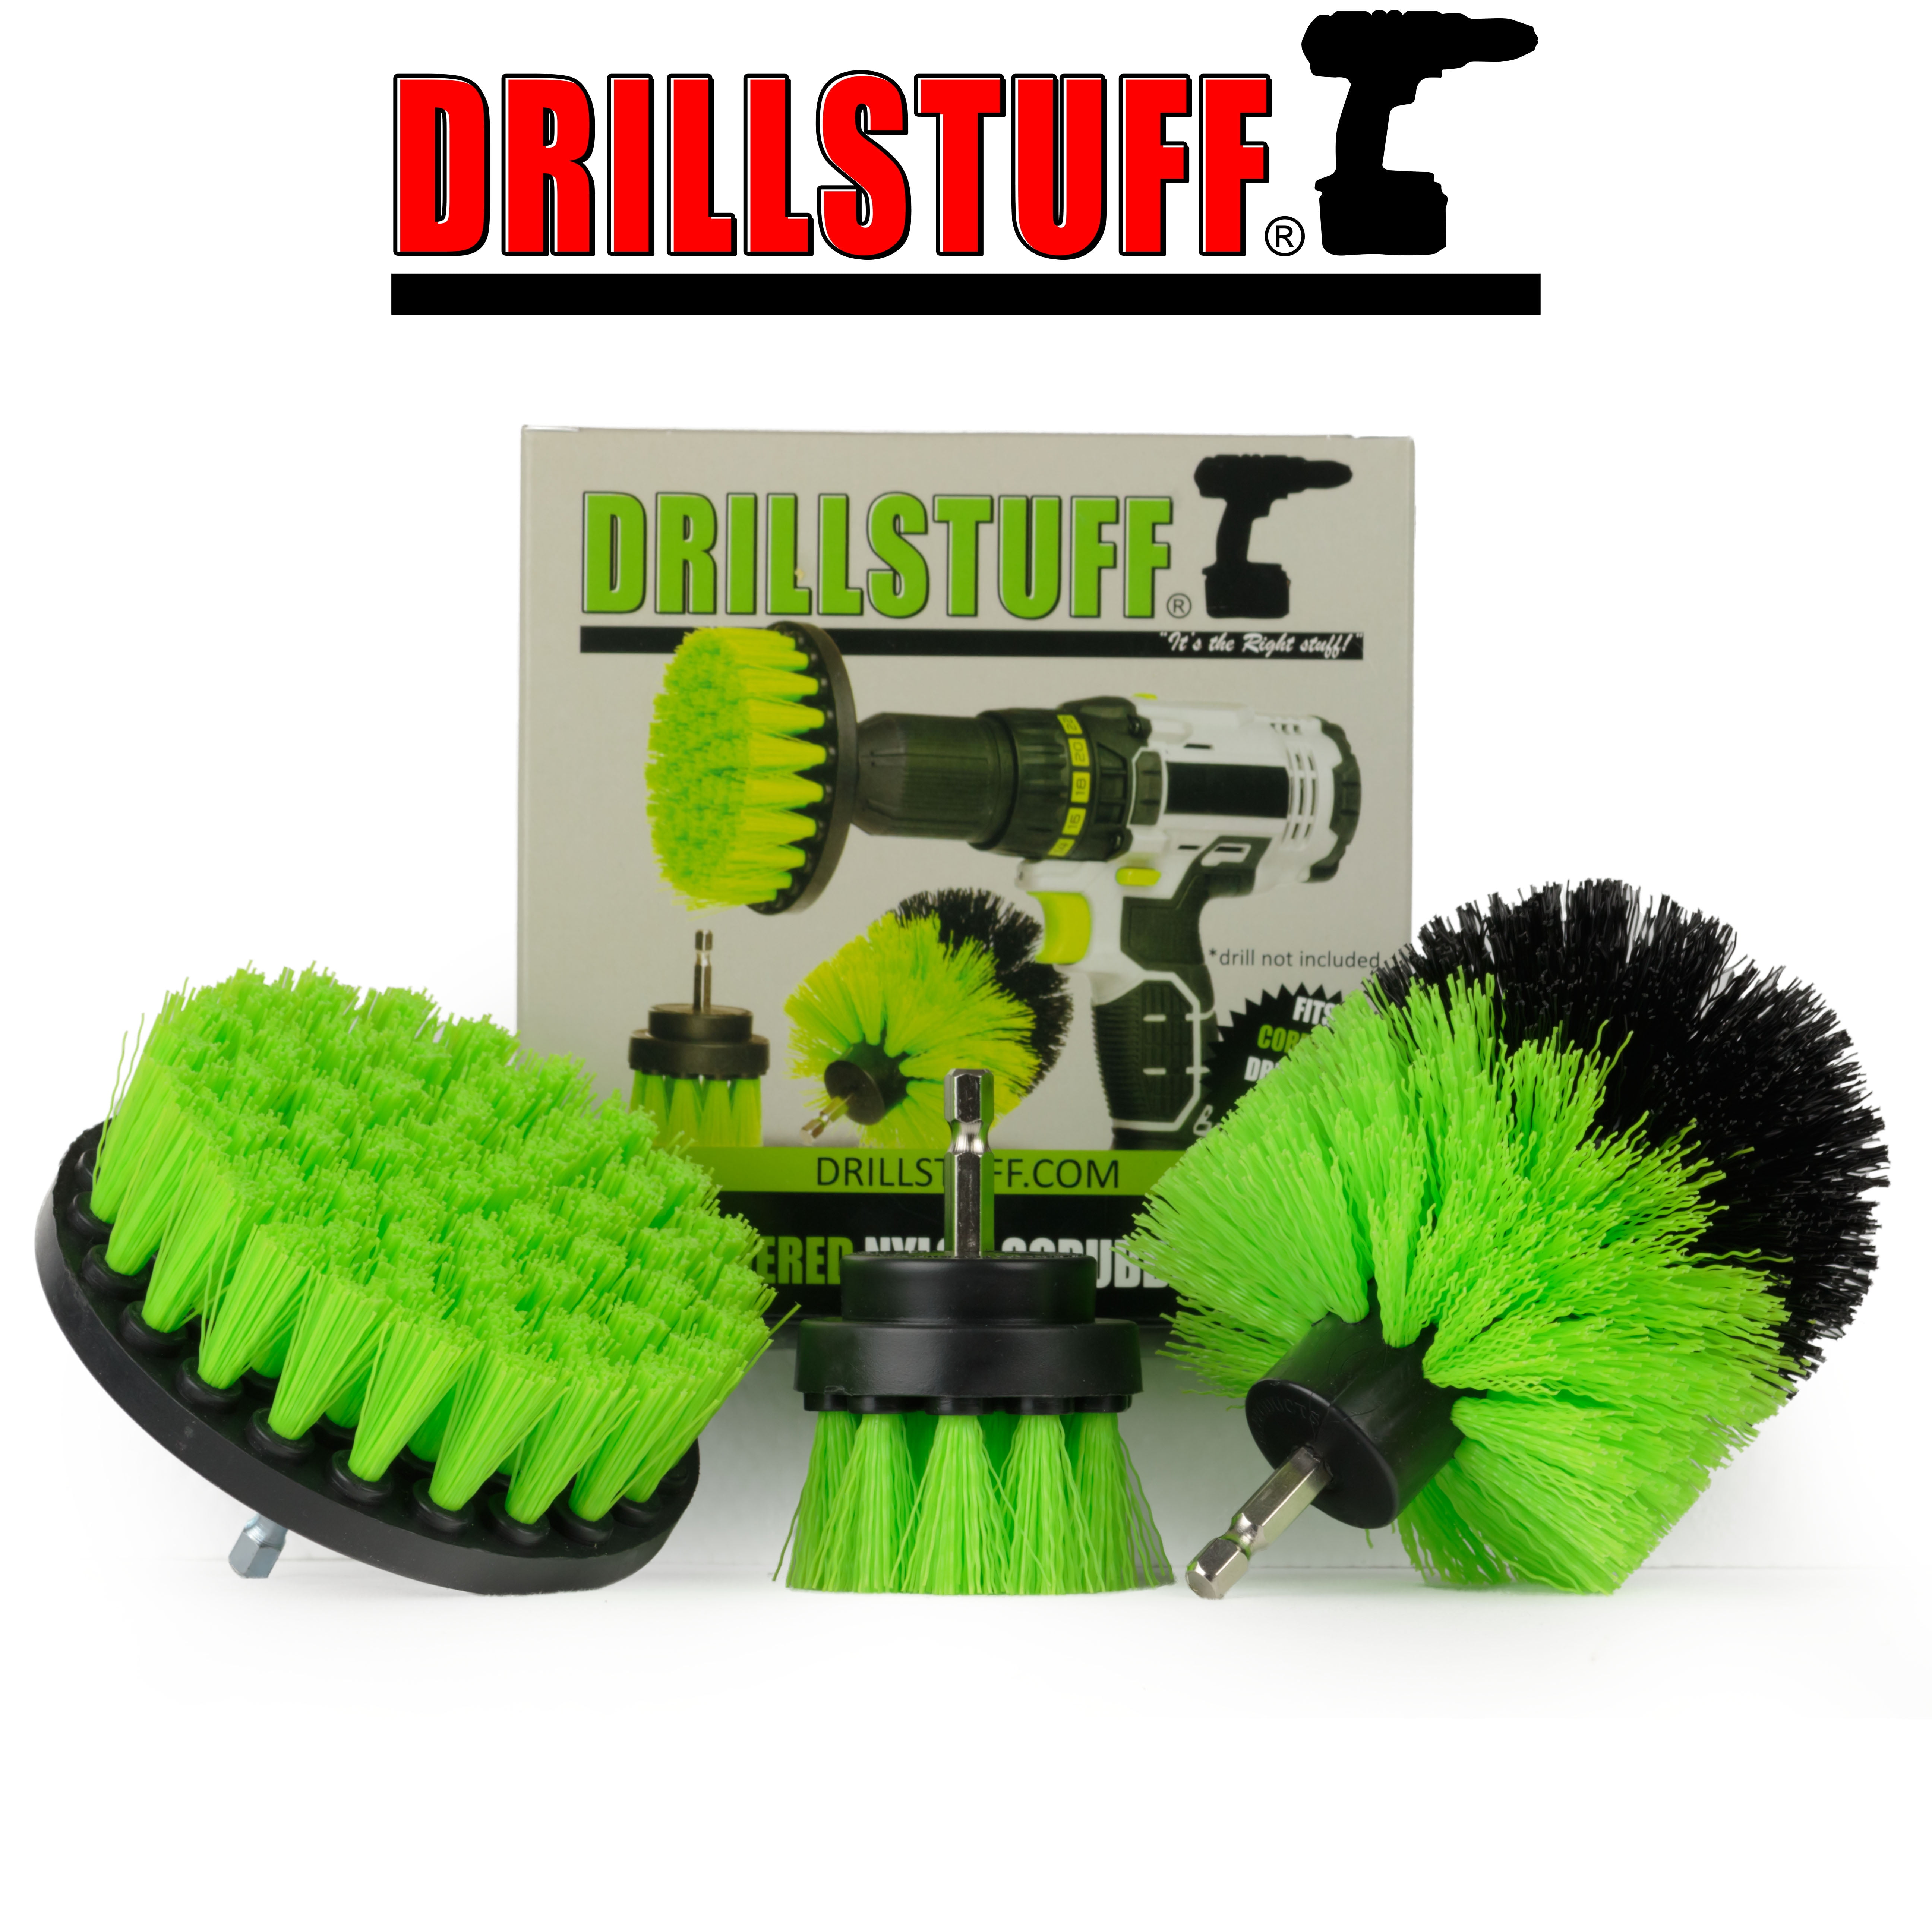 Drillbrush Green Kitchen Cleaning Drill Brushes Sink Cleaner Kitchen Cleaner /kitchen Brush Cabinet Cleaner 